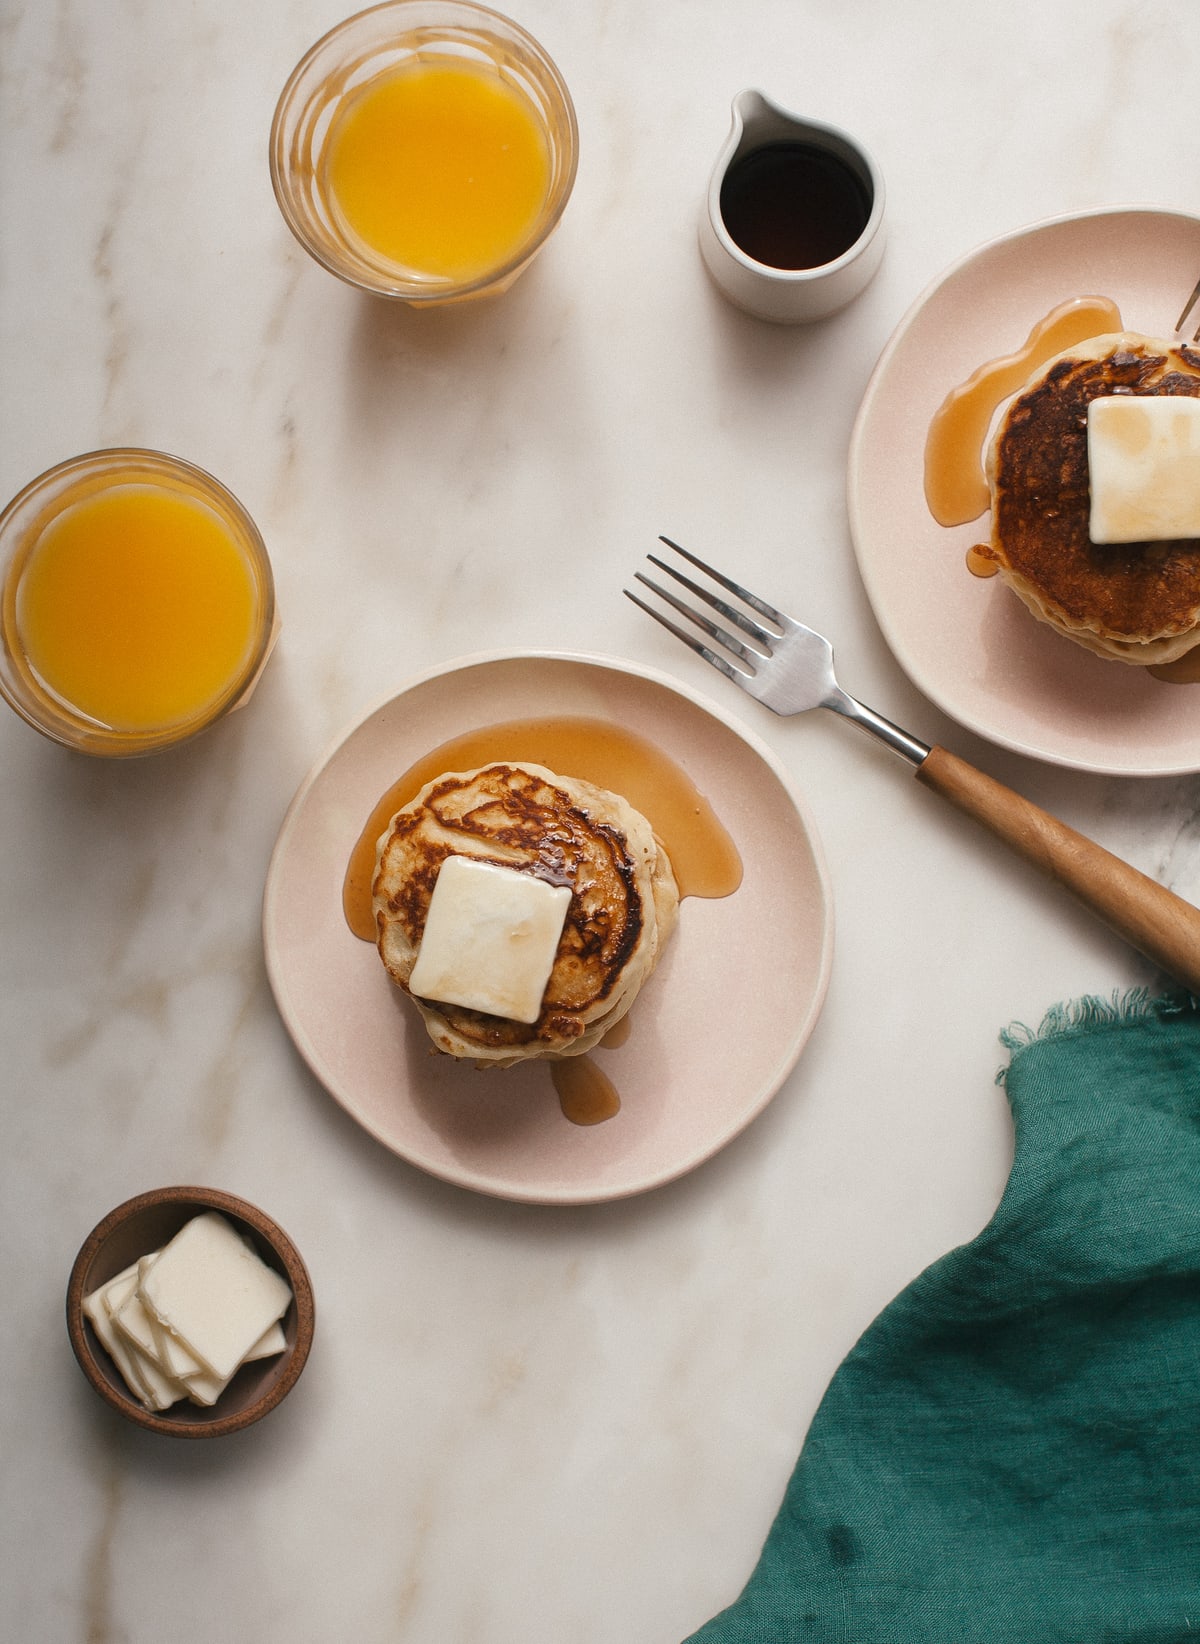 Overhead image of lemon ricotta pancakes on plates with butter and maple syrup.